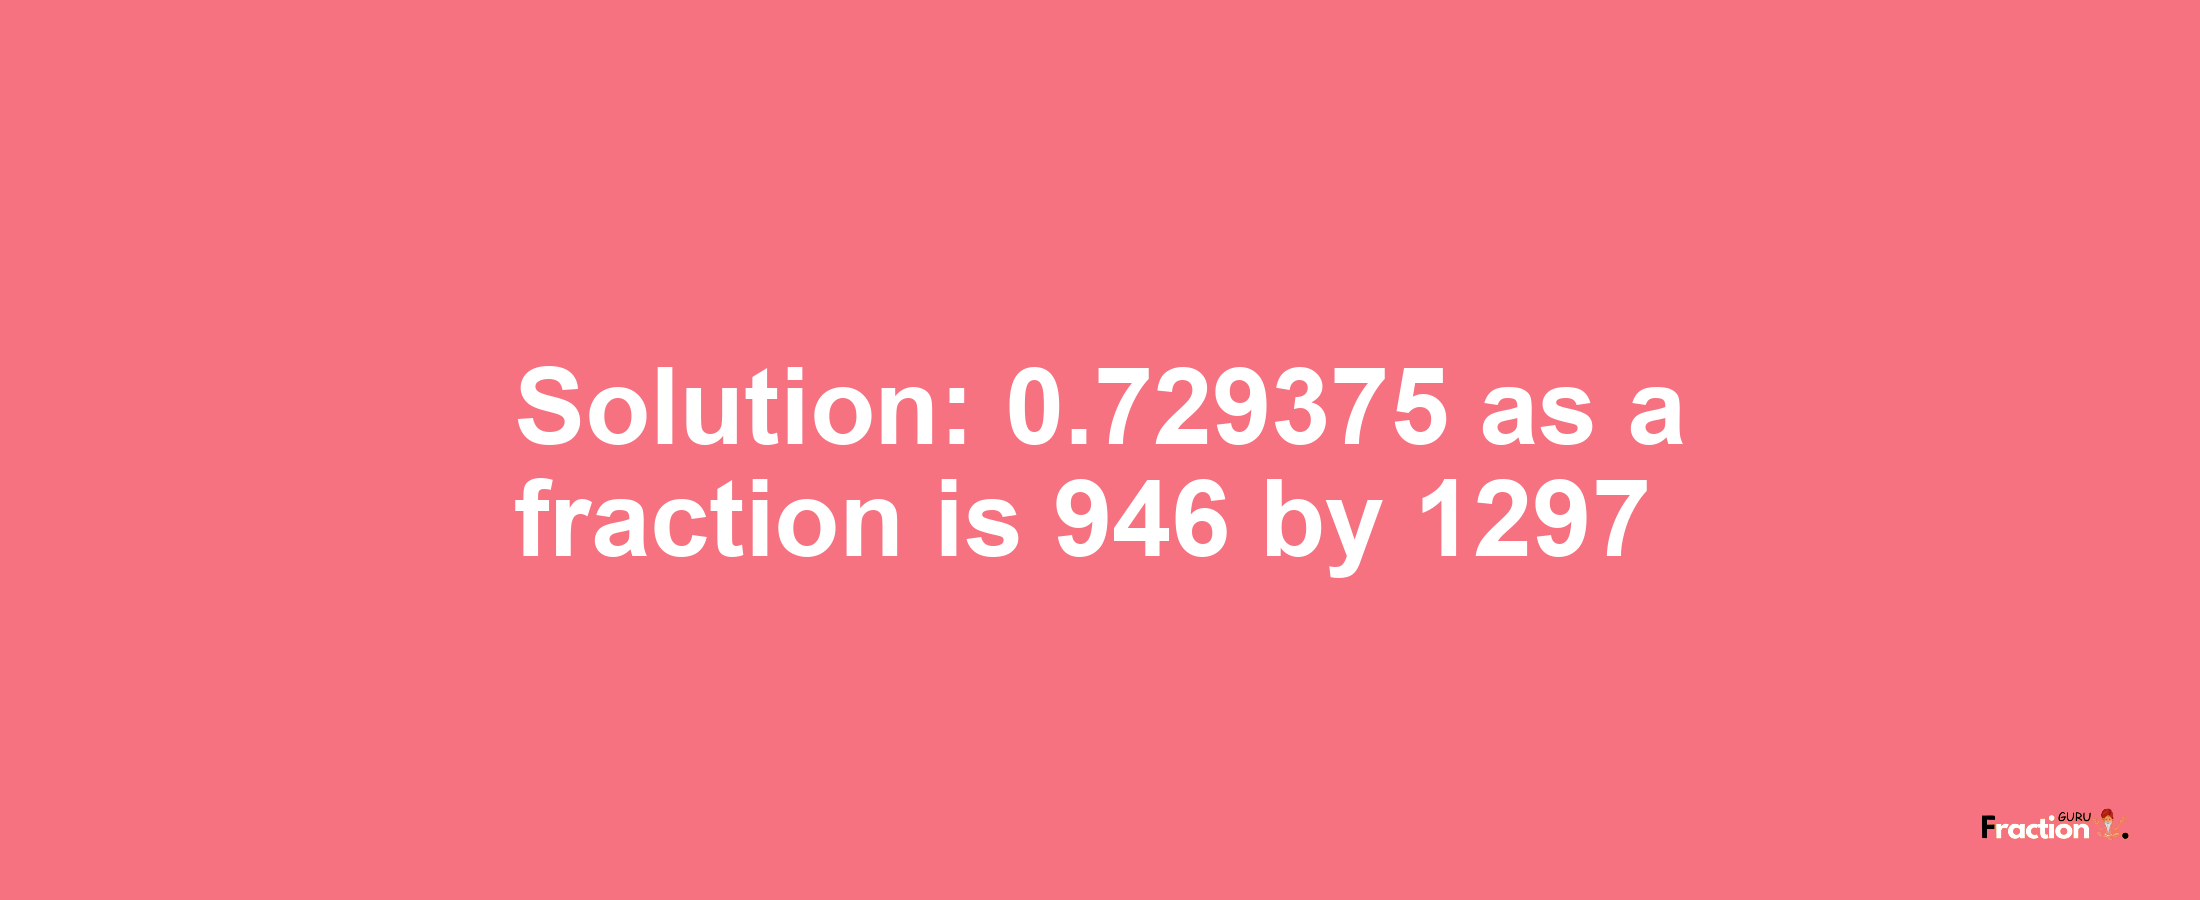 Solution:0.729375 as a fraction is 946/1297